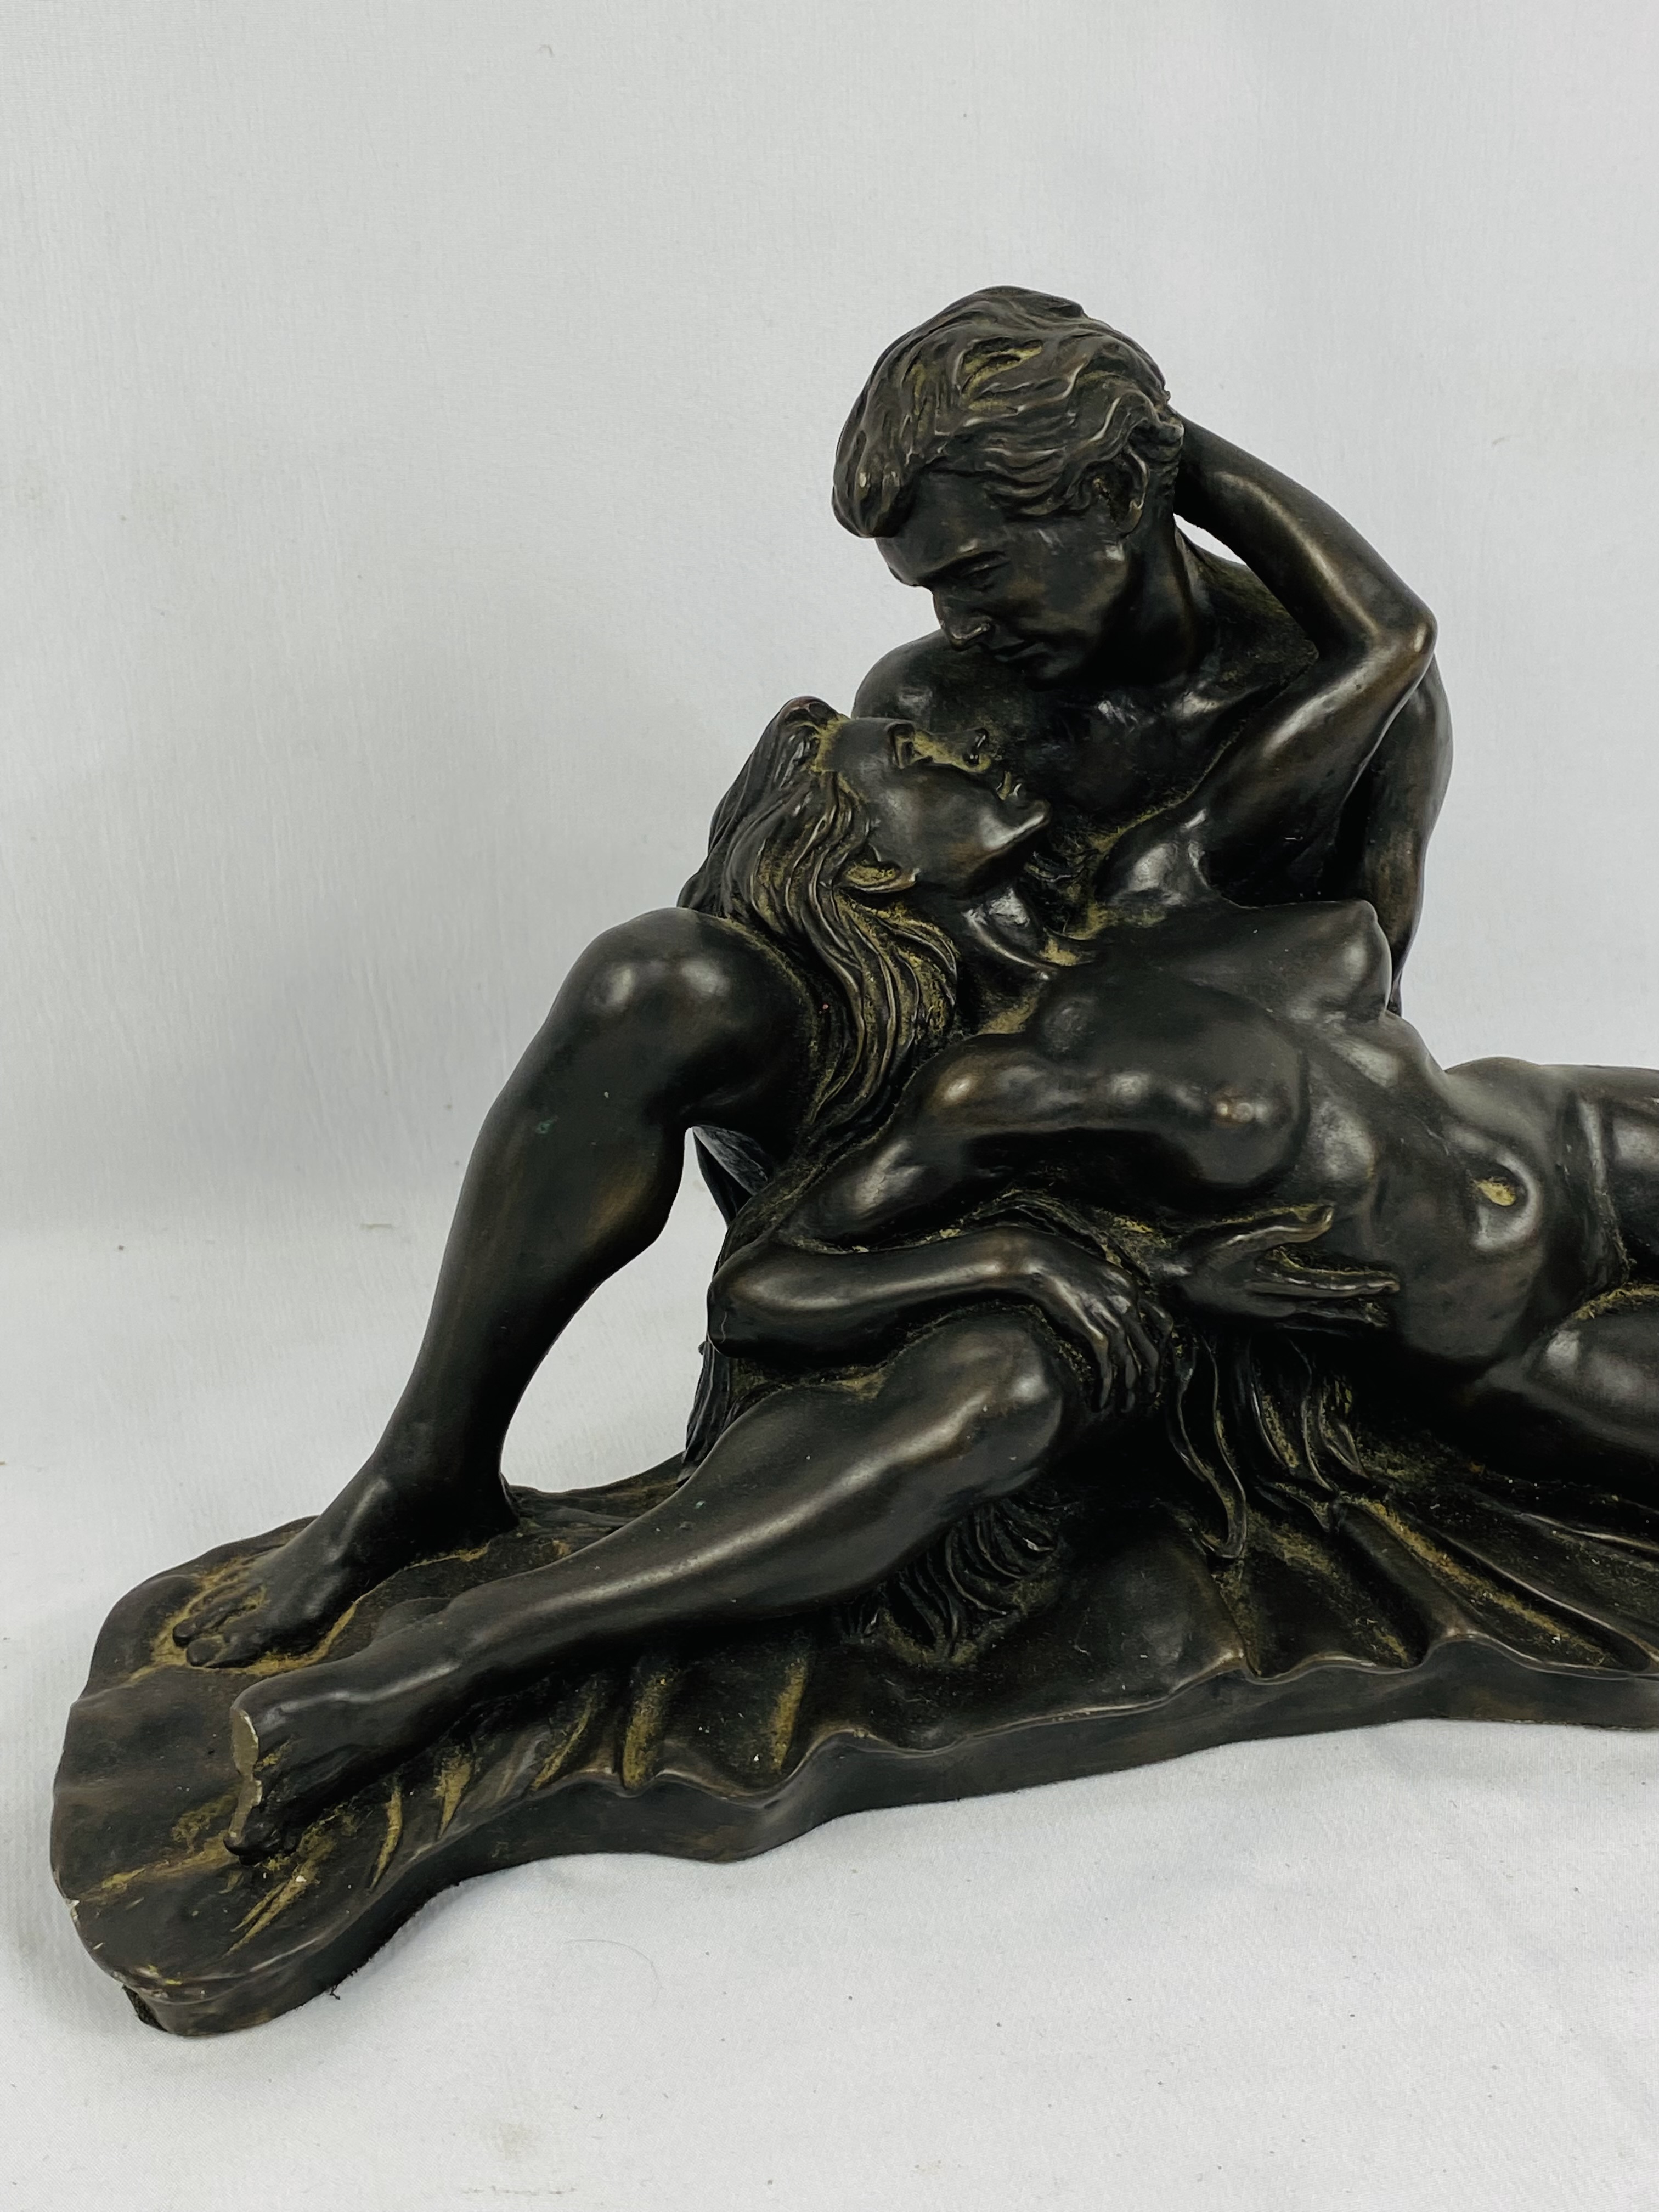 Resin bronzed sculpture of lovers embracing, signed R Cameron - Image 4 of 4